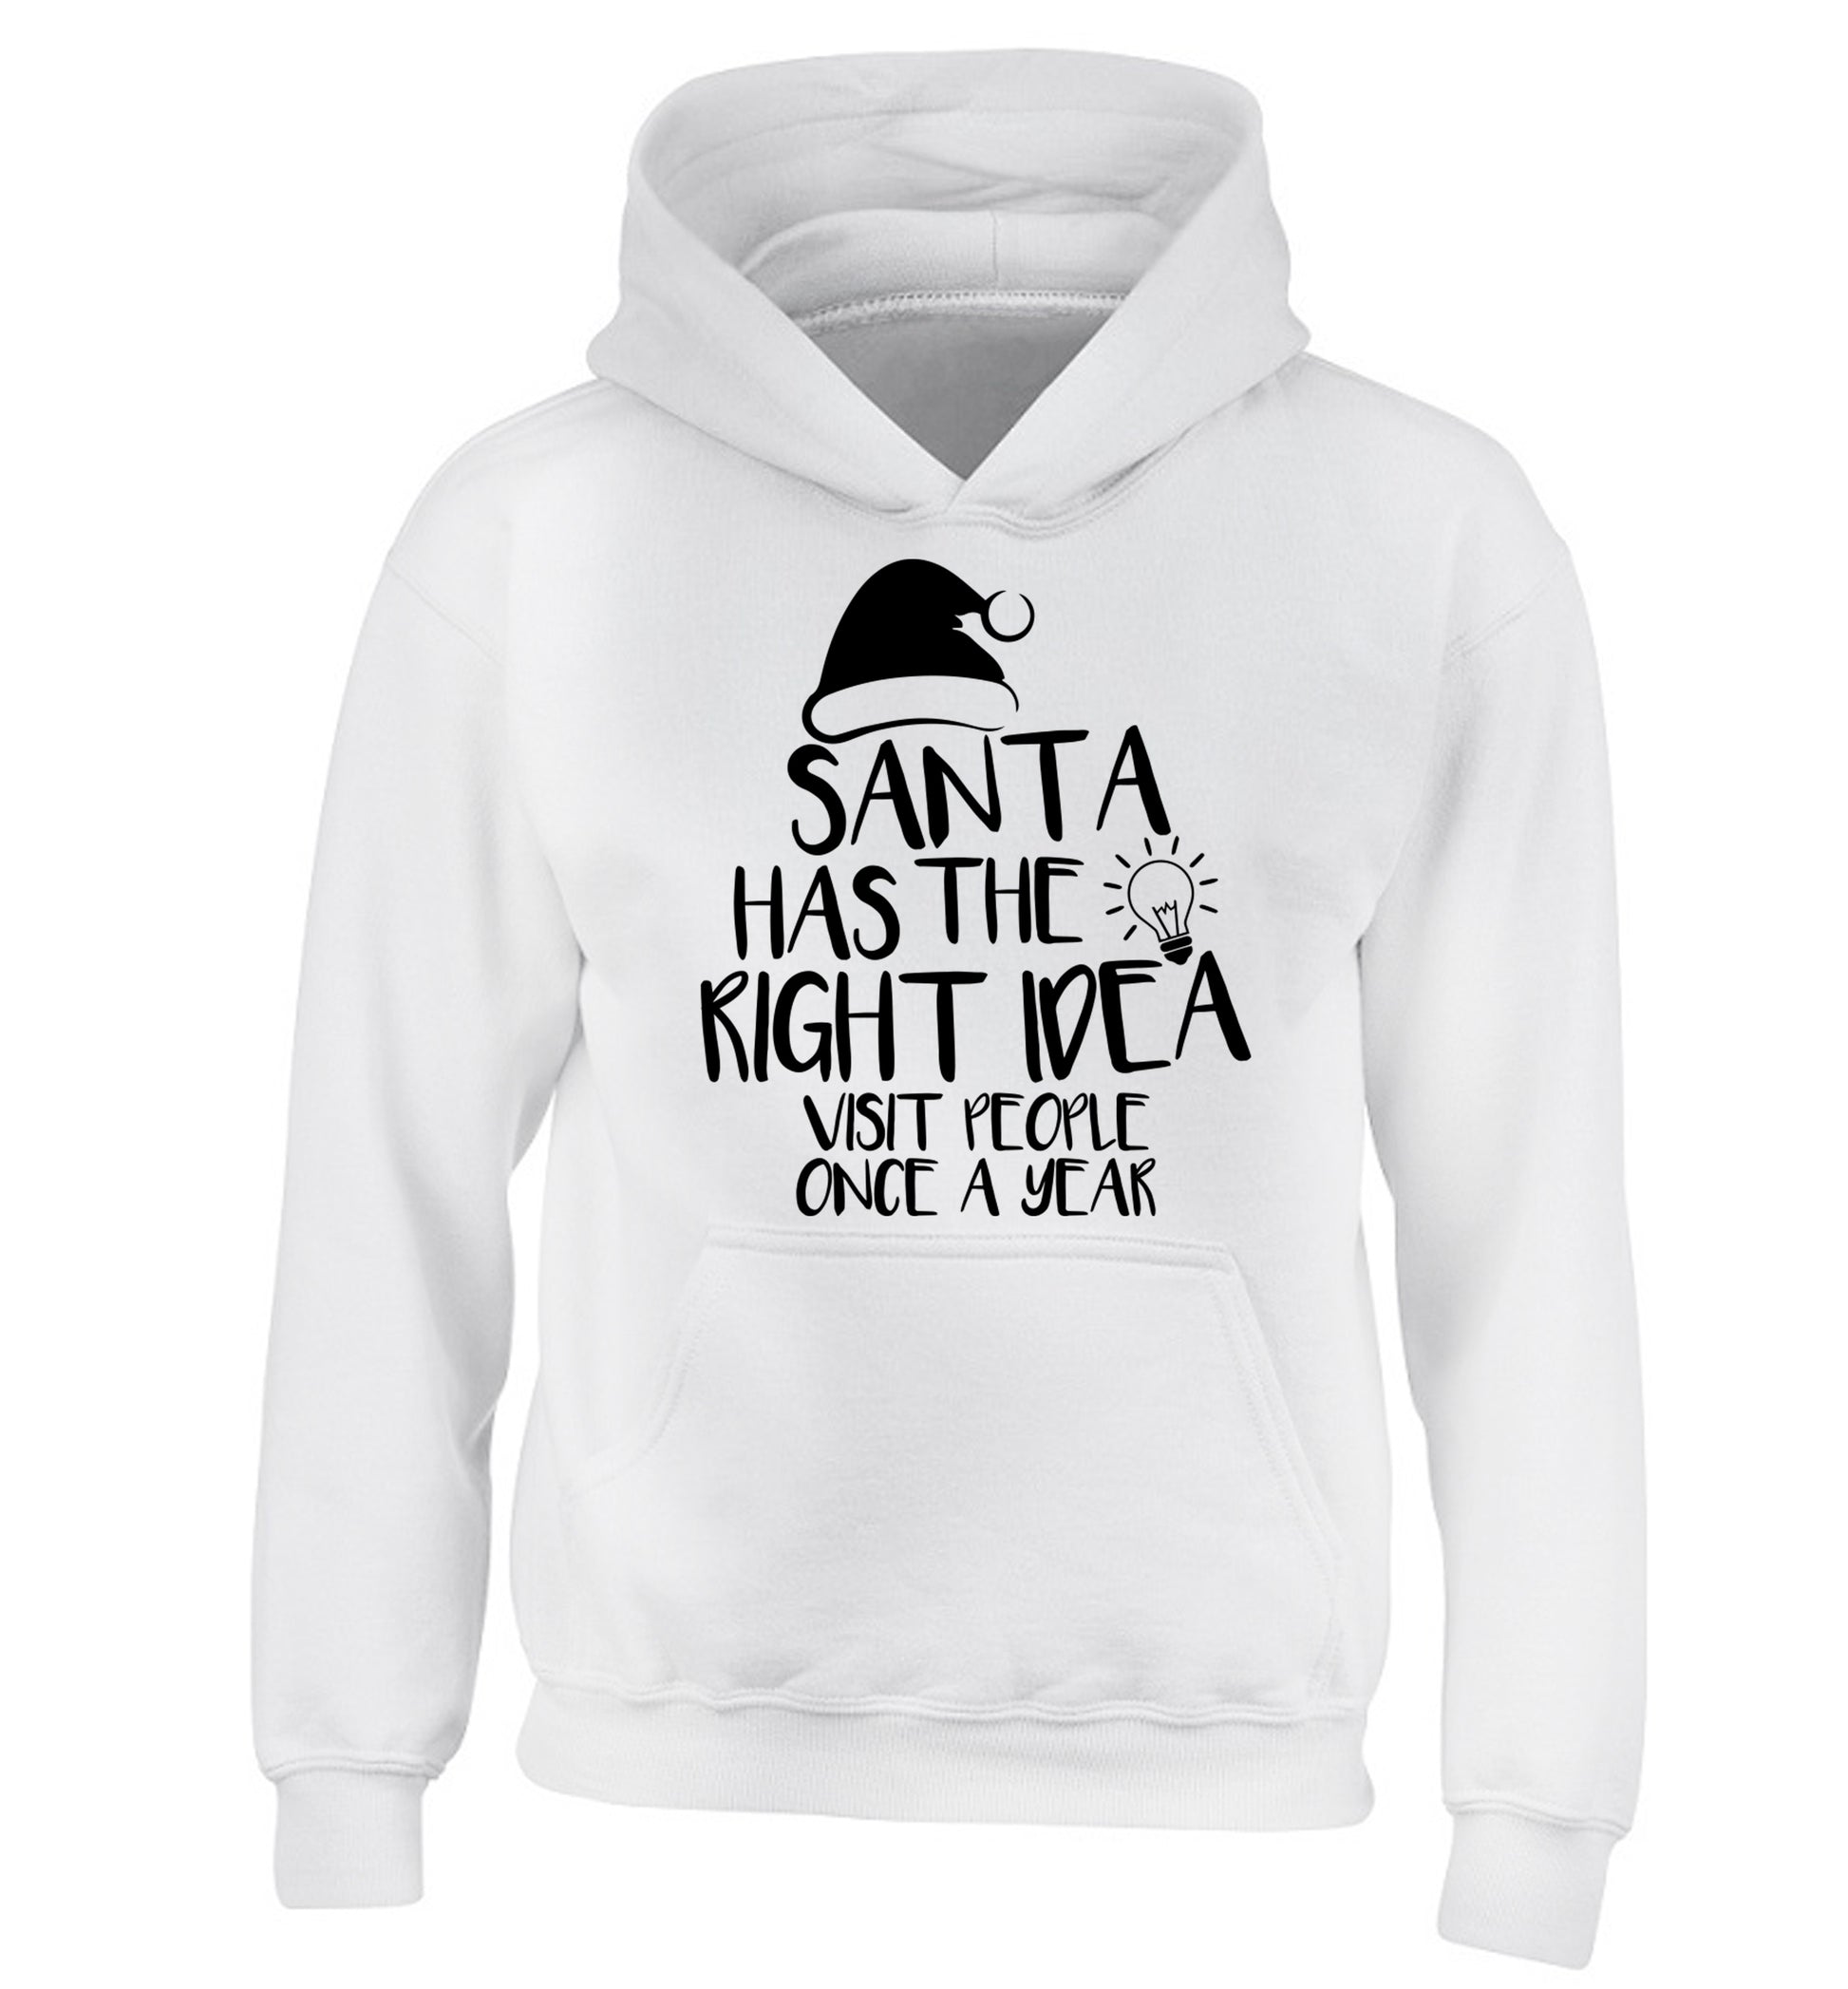 Santa has the right idea visit people once a year children's white hoodie 12-14 Years